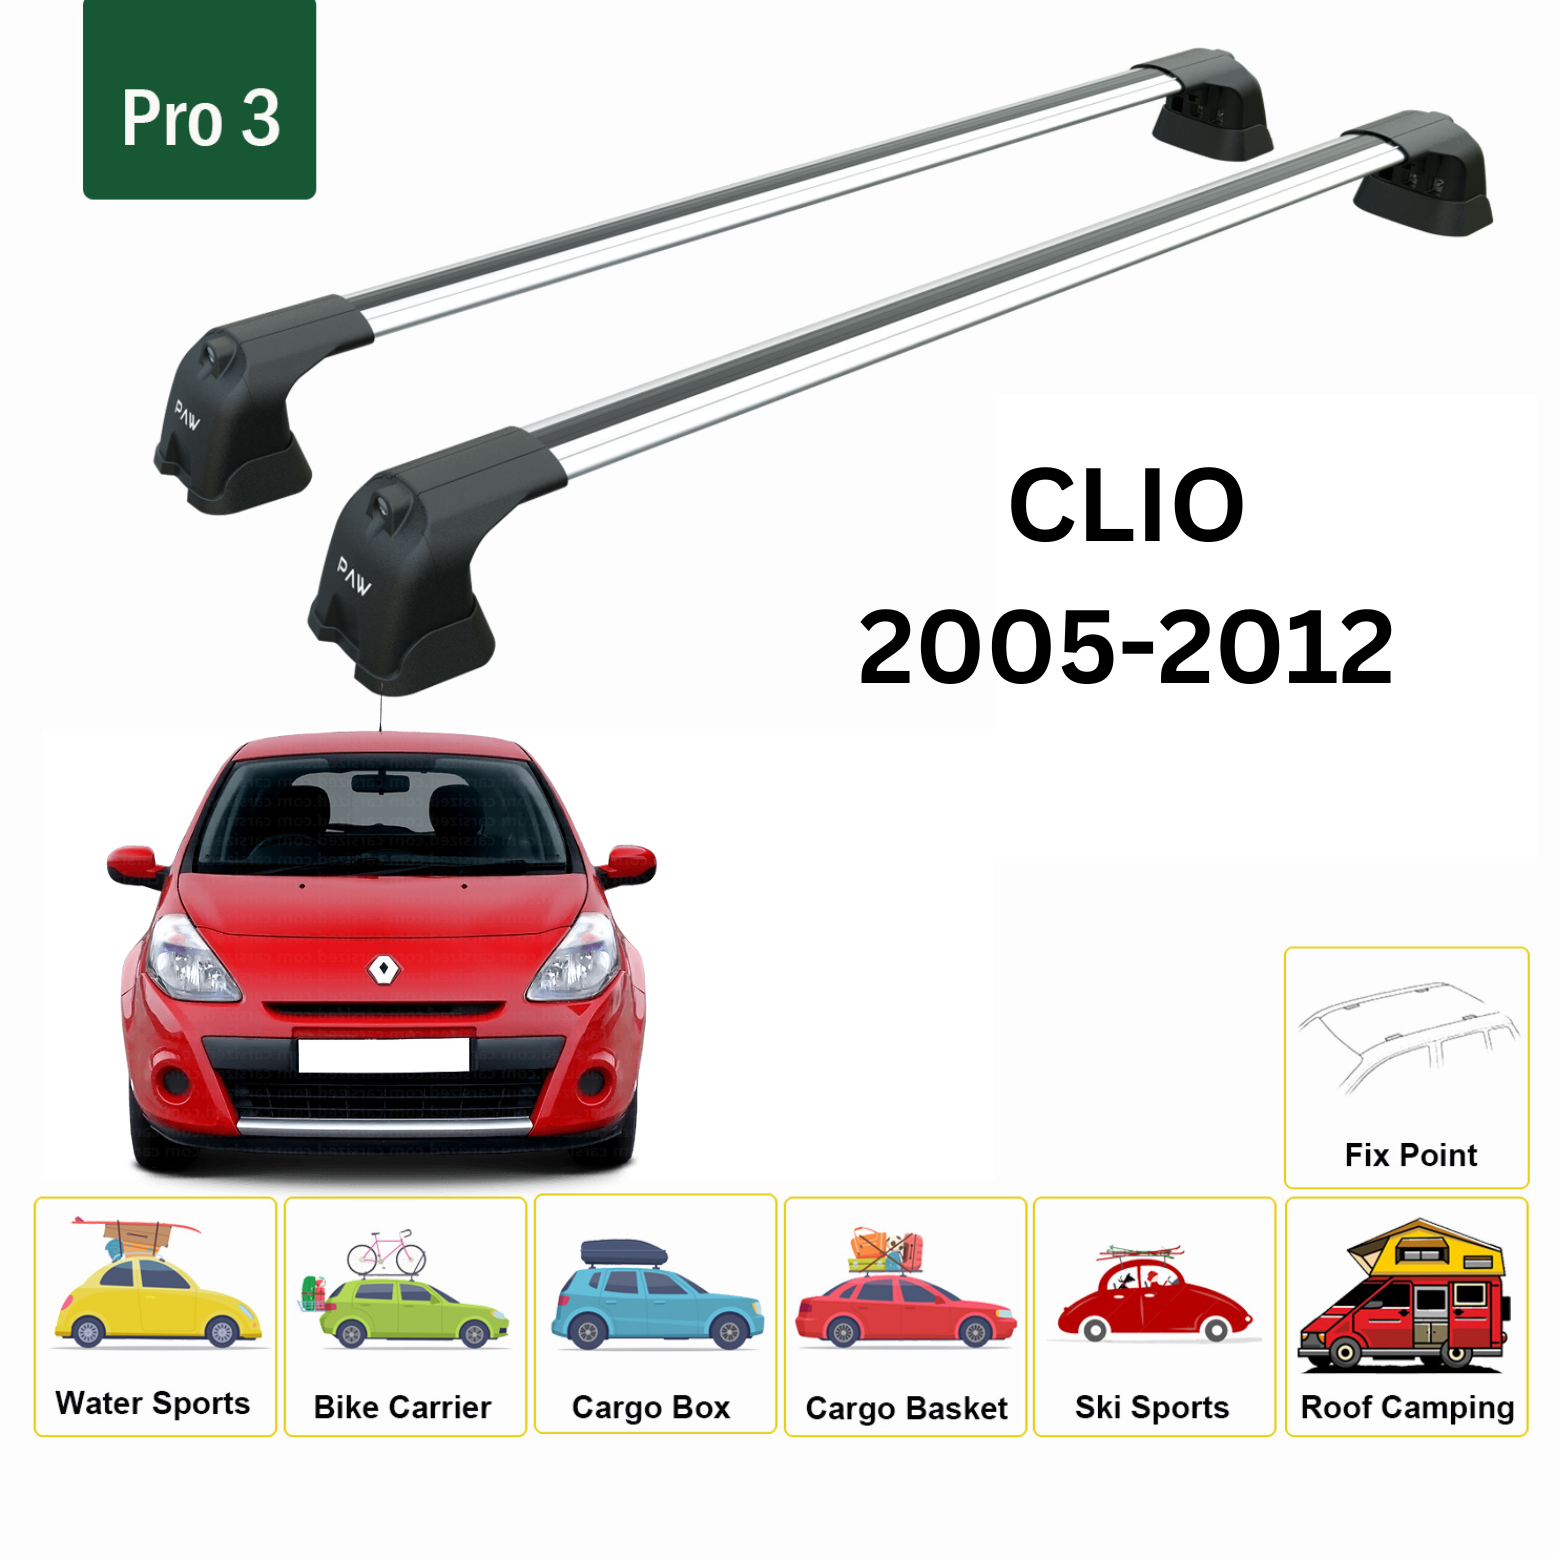 For Renault Clio 2005-2012 Roof Rack System, Aluminium Cross Bar, Metal Bracket, Fix Point, Silver - 0